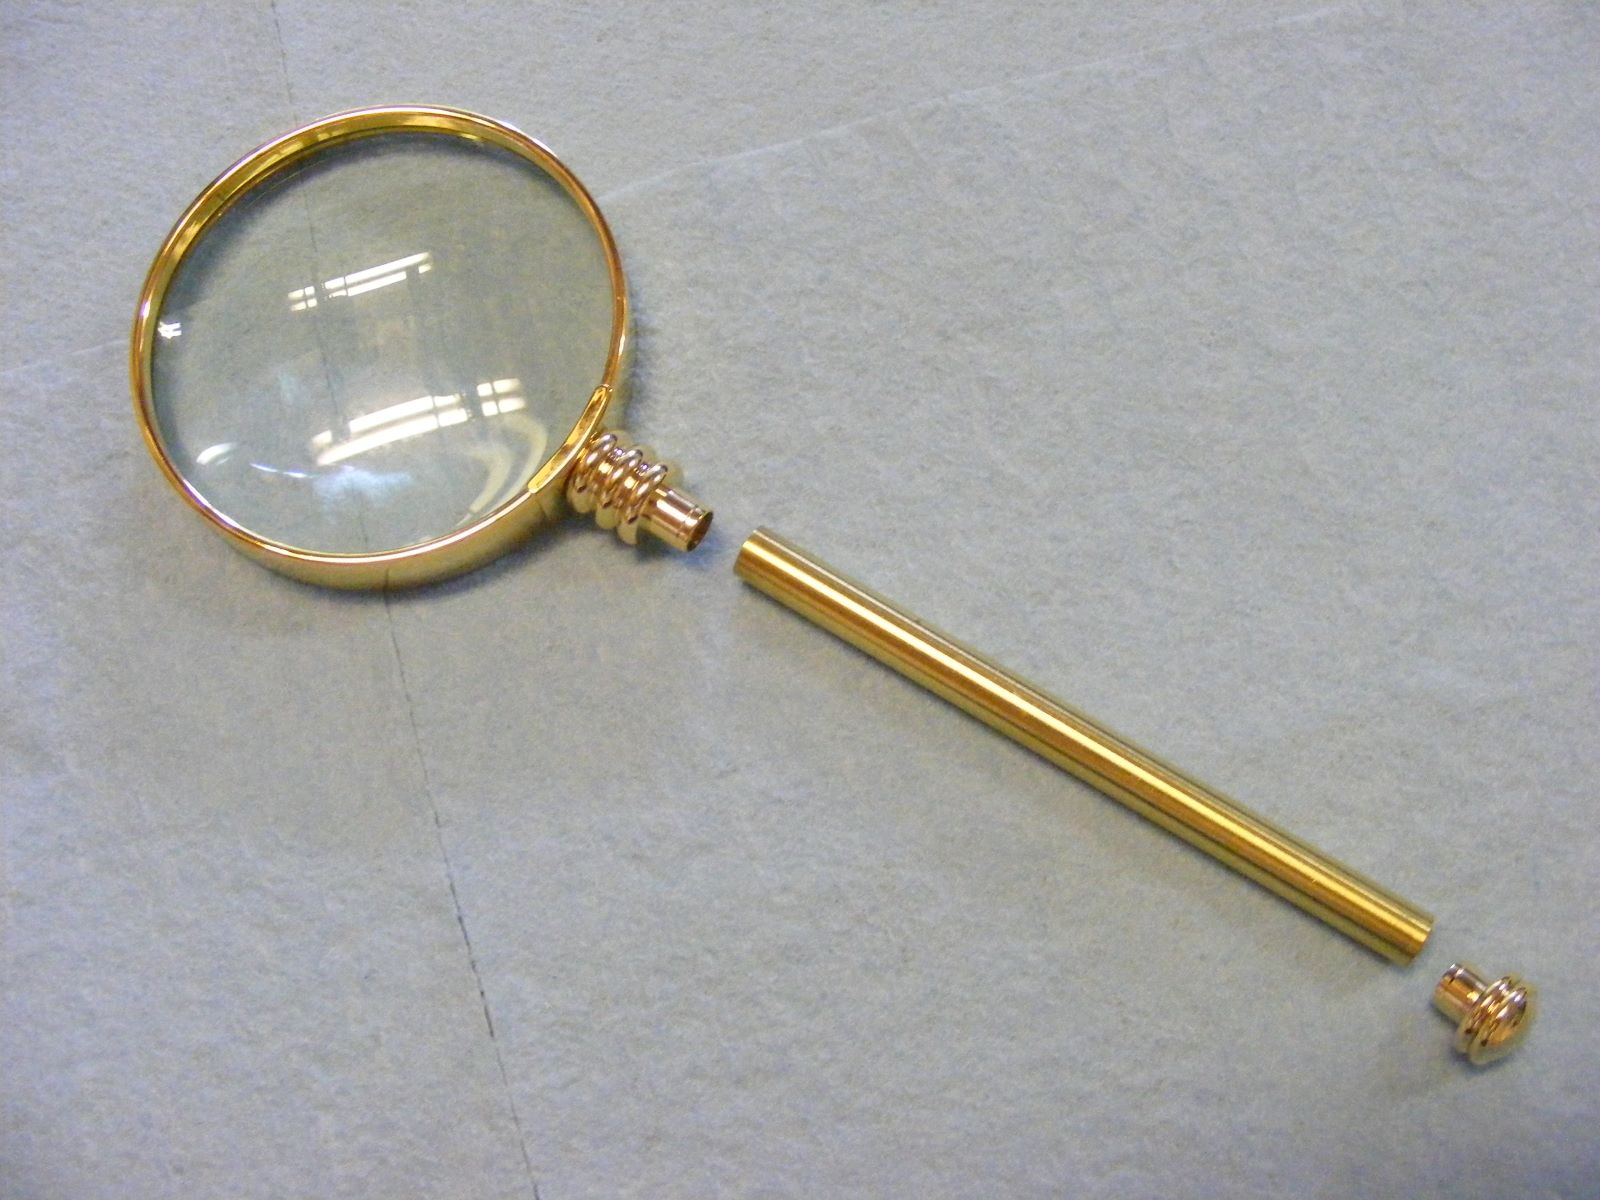 How To Make A Magnifying Glass